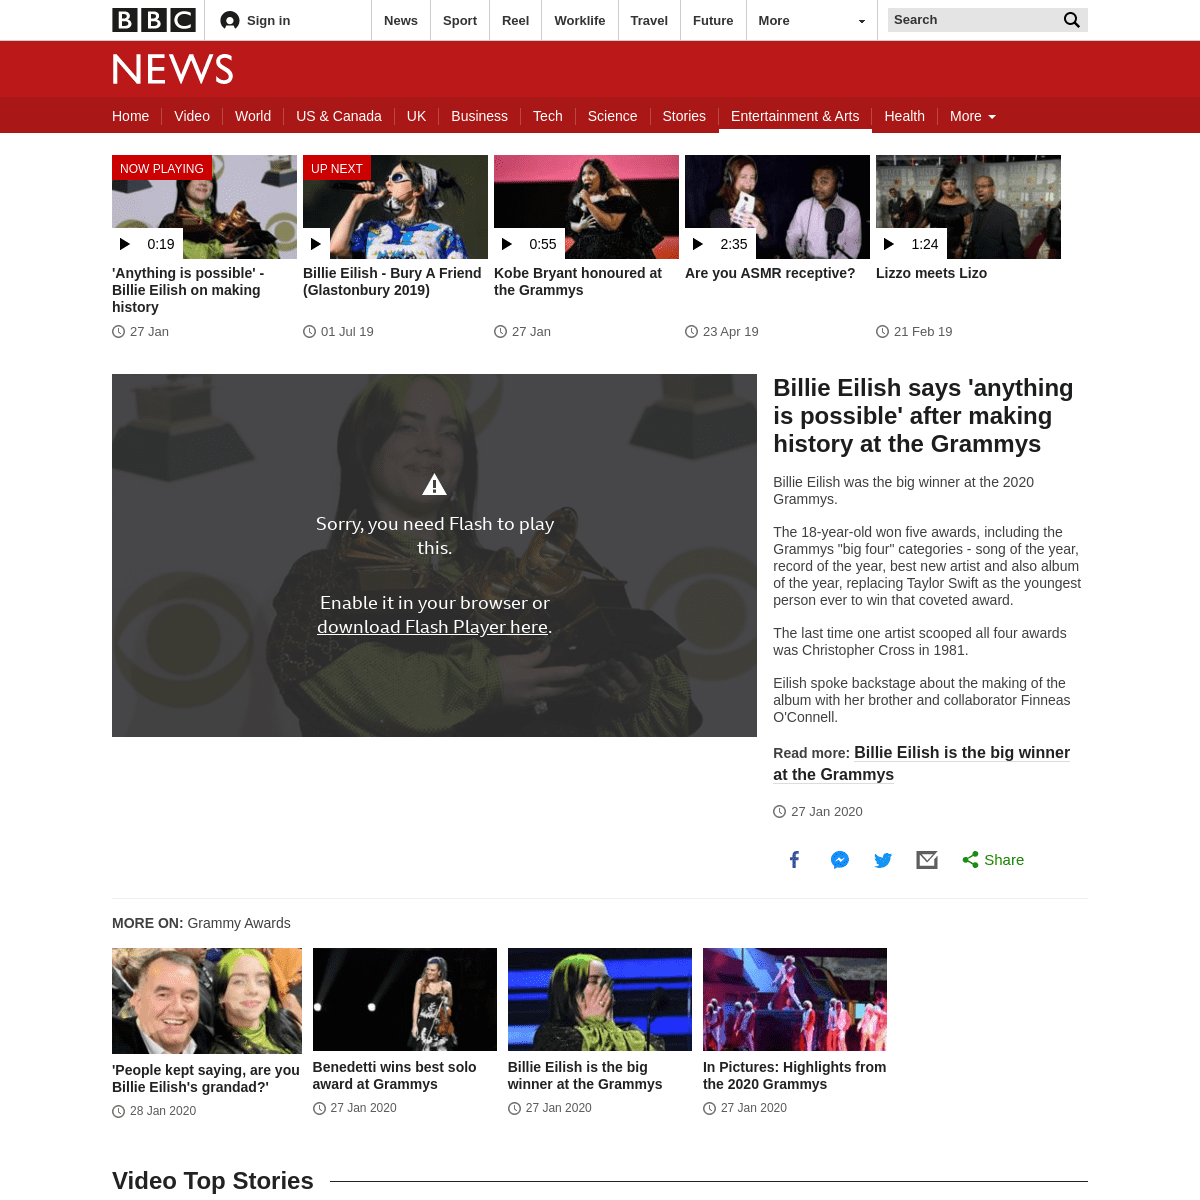 A complete backup of www.bbc.co.uk/news/av/entertainment-arts-51263339/billie-eilish-says-anything-is-possible-after-making-hist